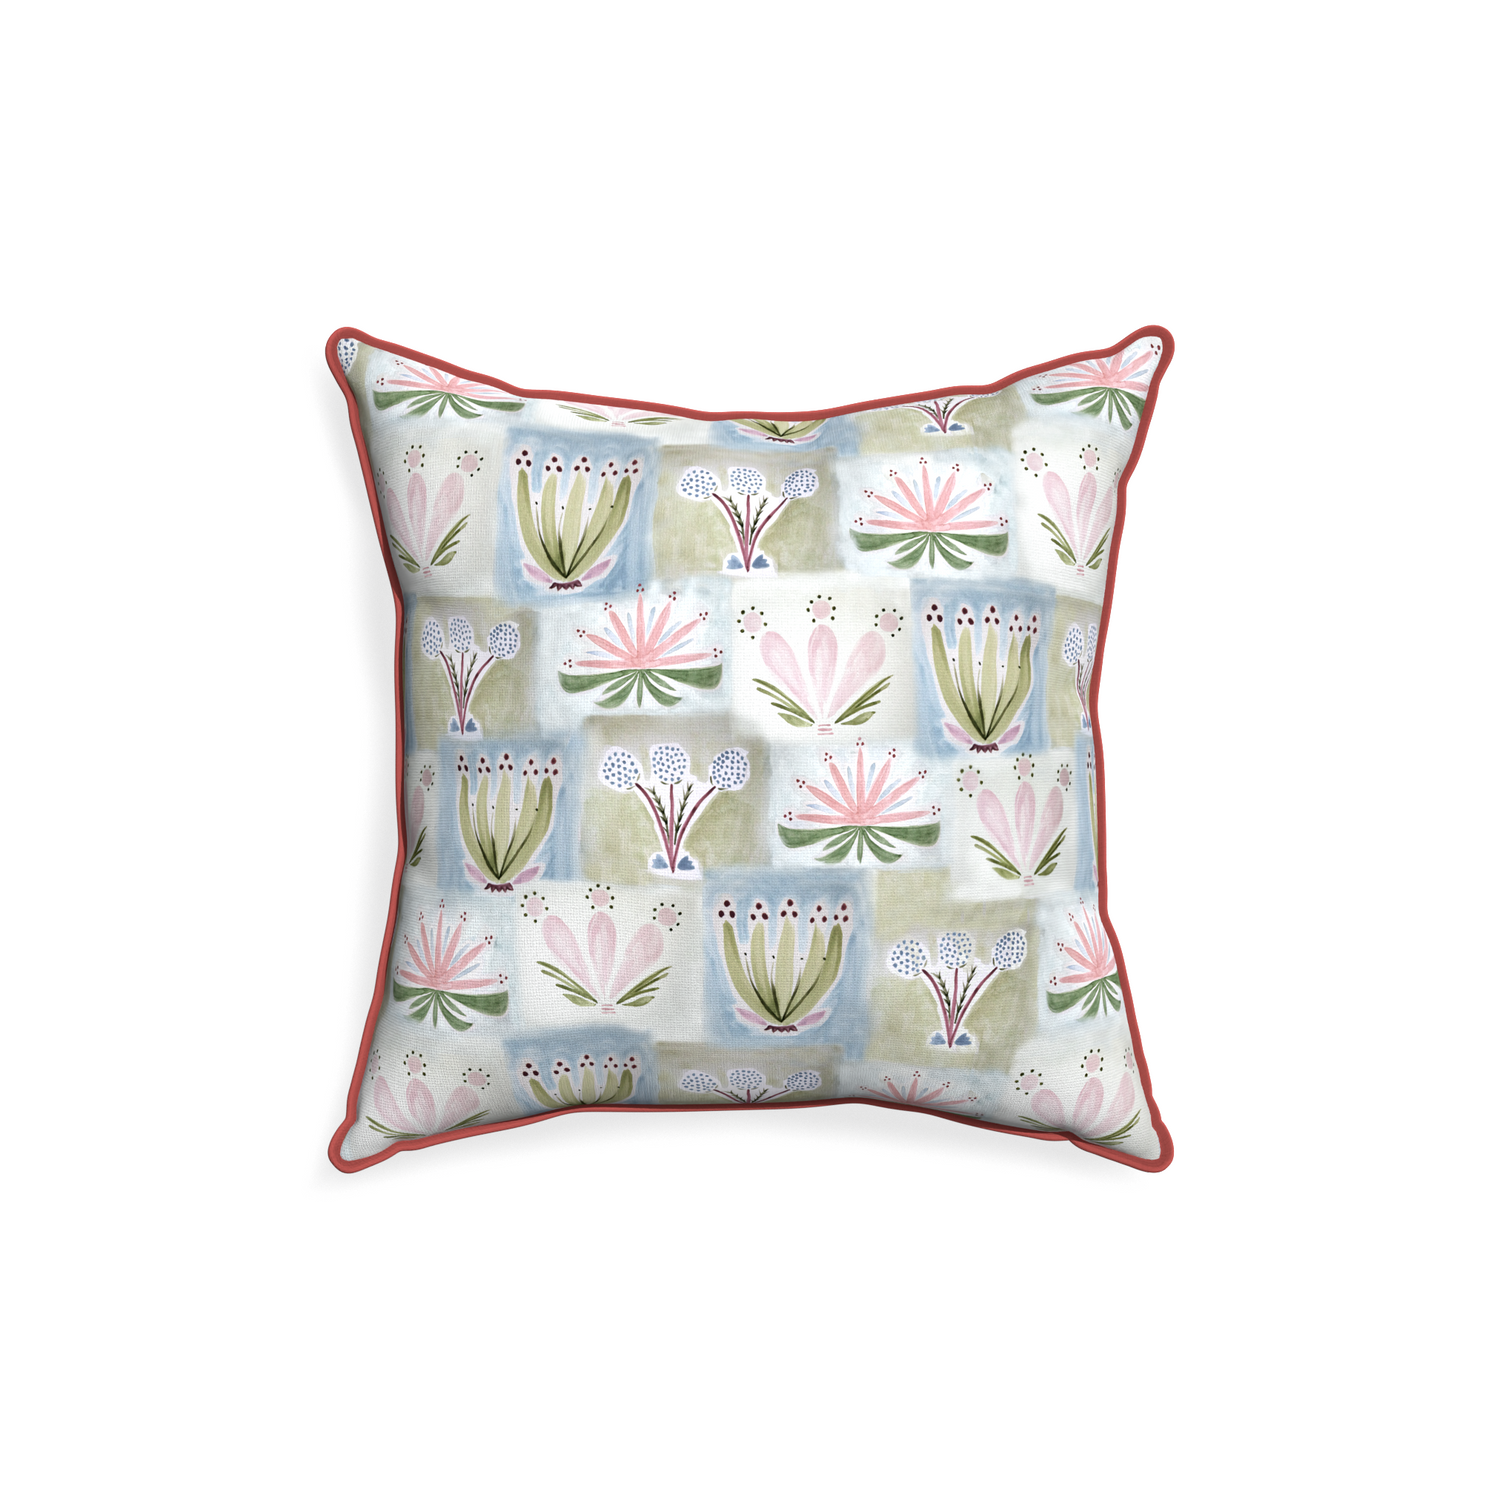 18-square harper custom hand-painted floralpillow with c piping on white background